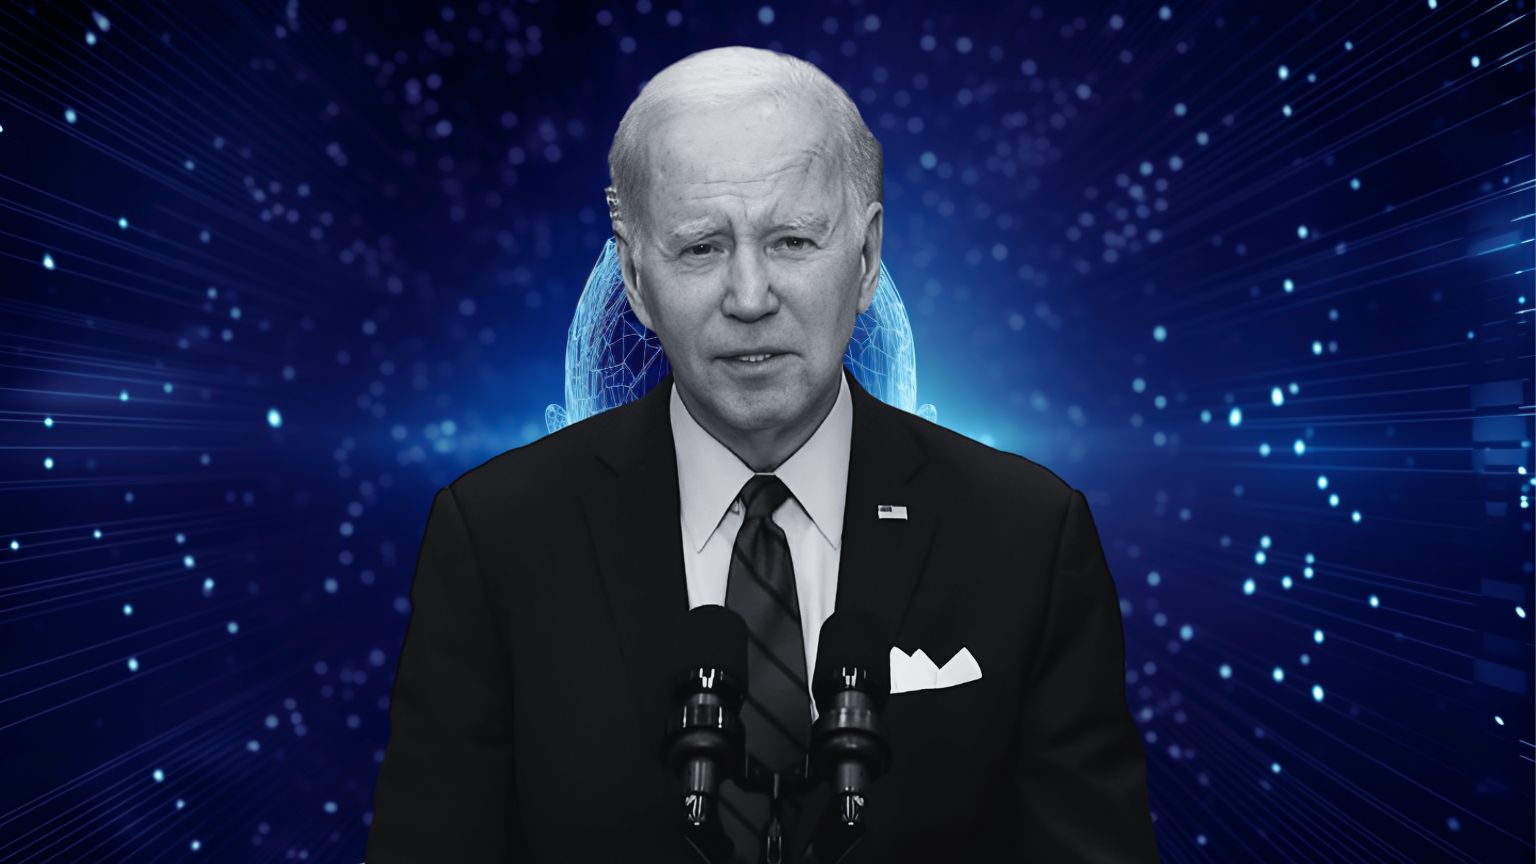 Biden administration considers AI regulation, looking at whether AI is promoting “misinformation”